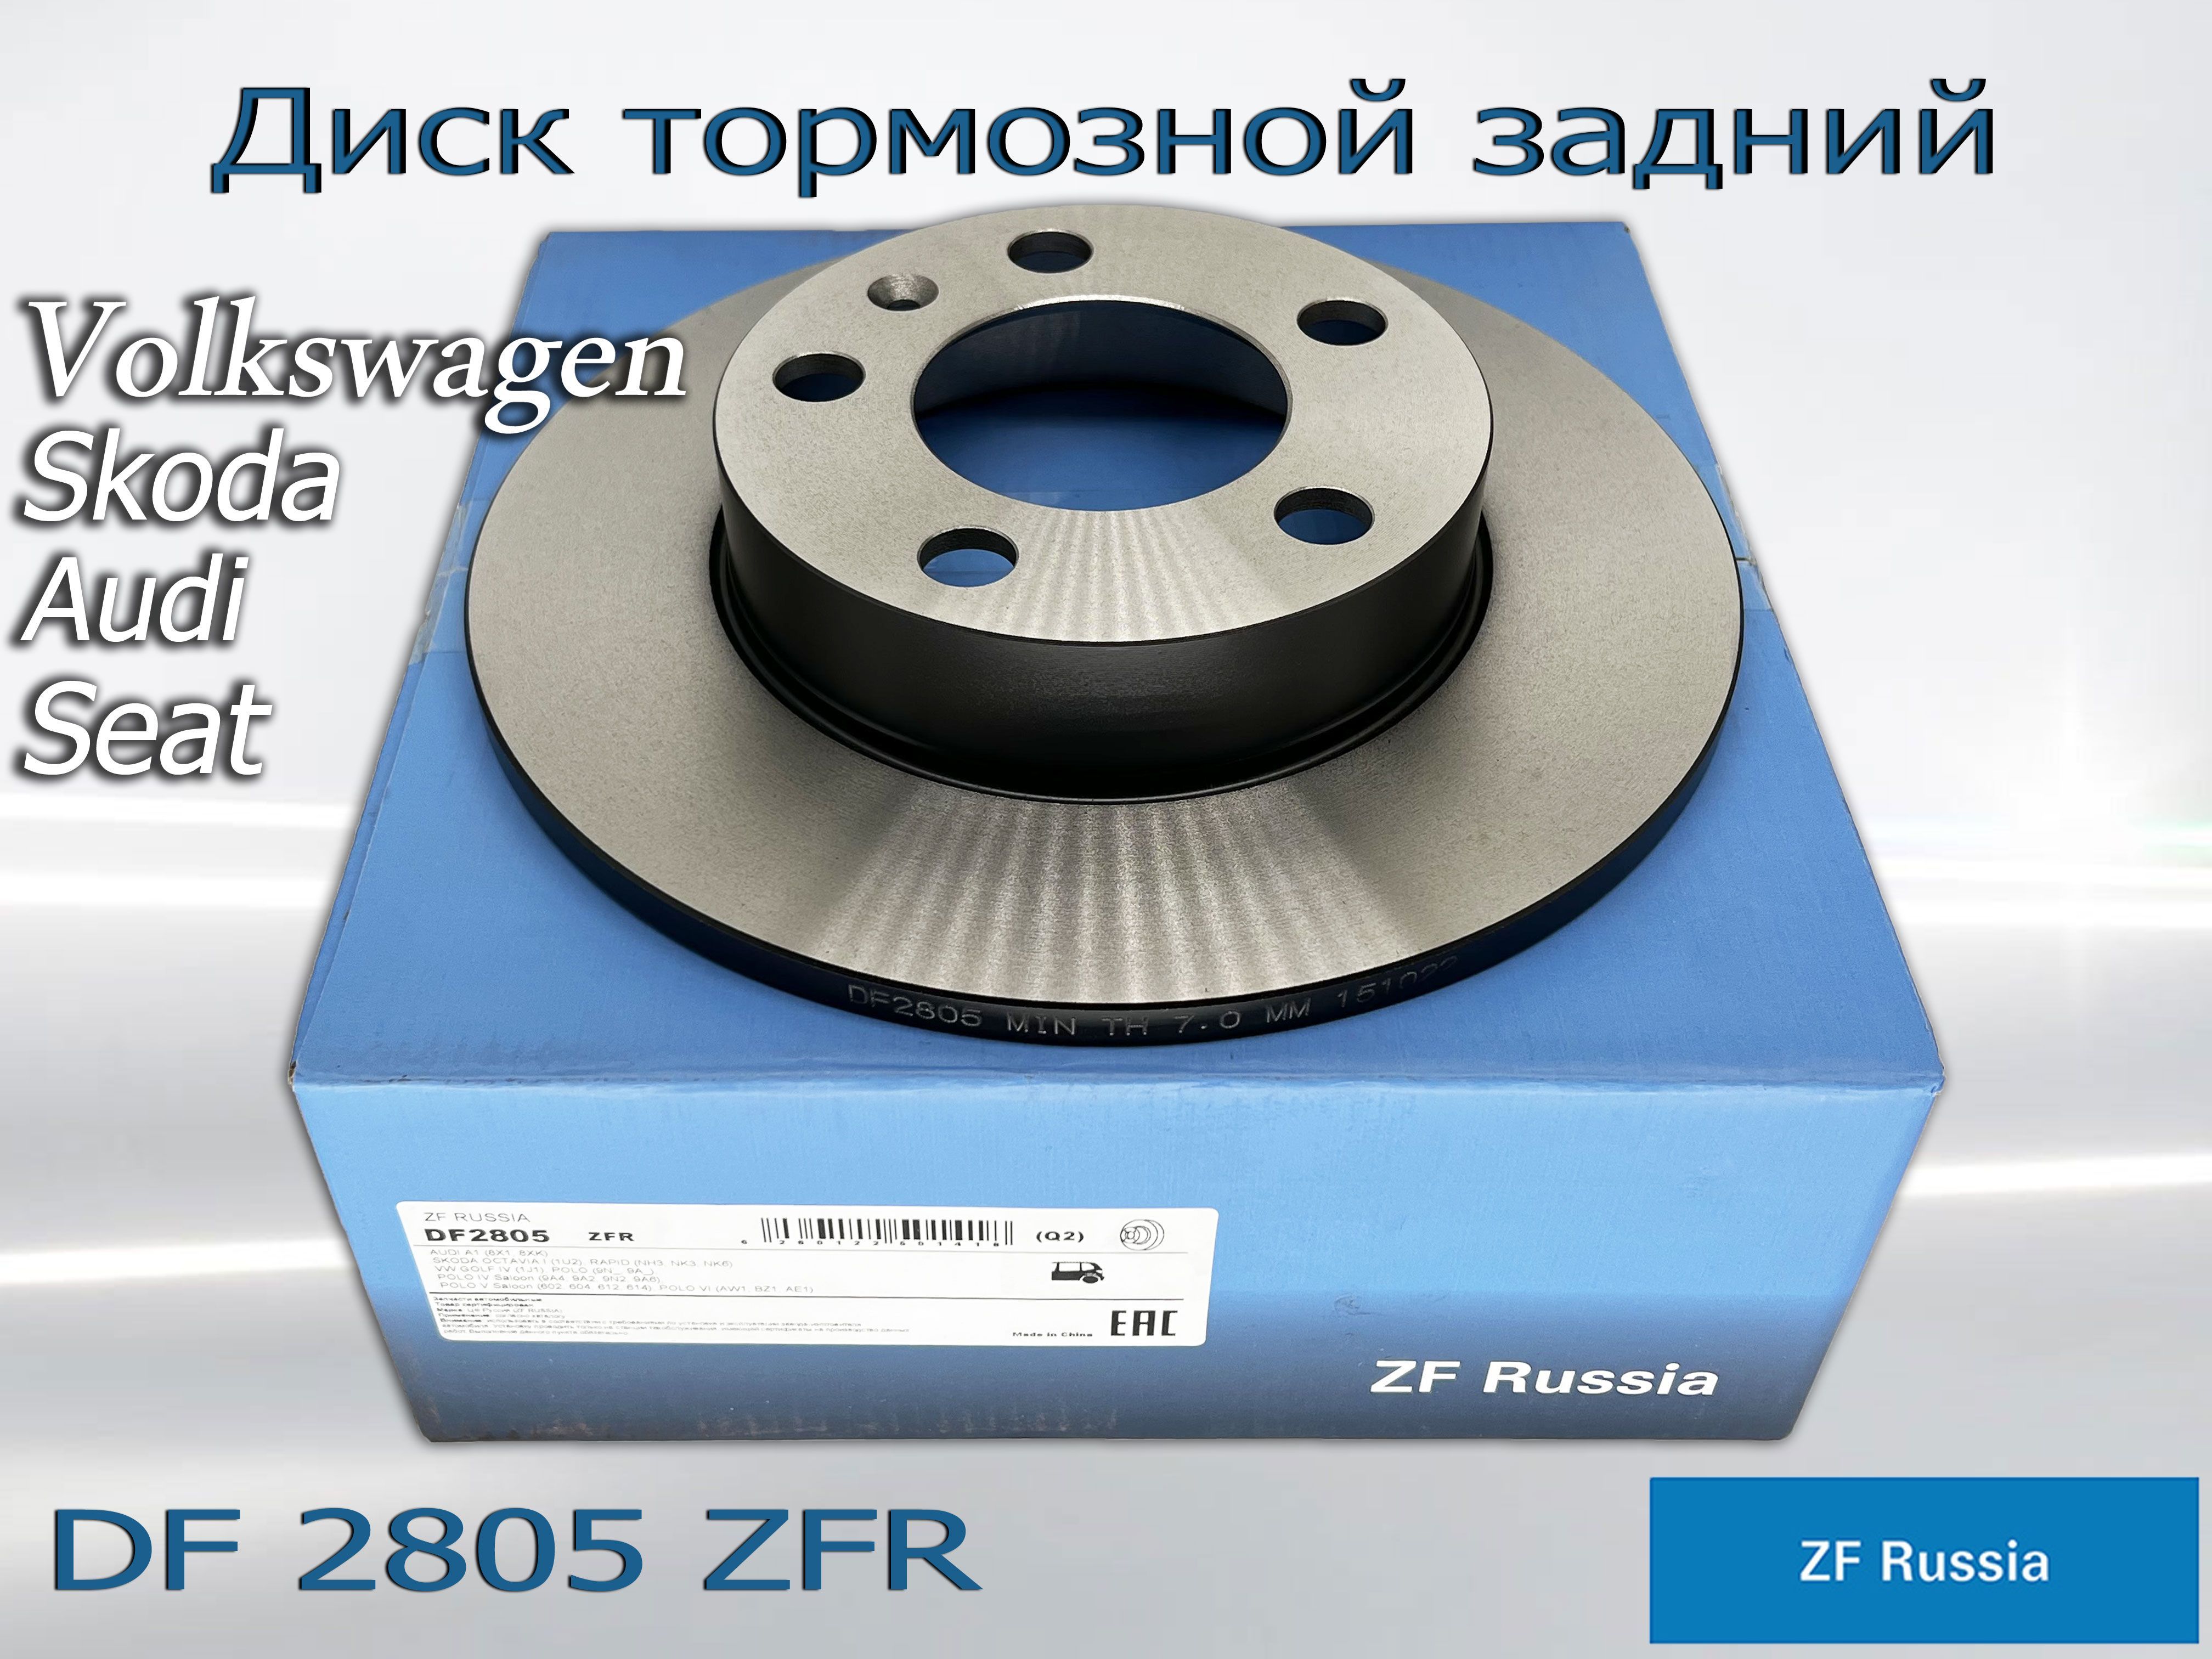 ZF Russia диски тормозные. Df2805. ZF Russia df2803zfr. ZF Russia df4465zfr. Тормозные диски zf russia